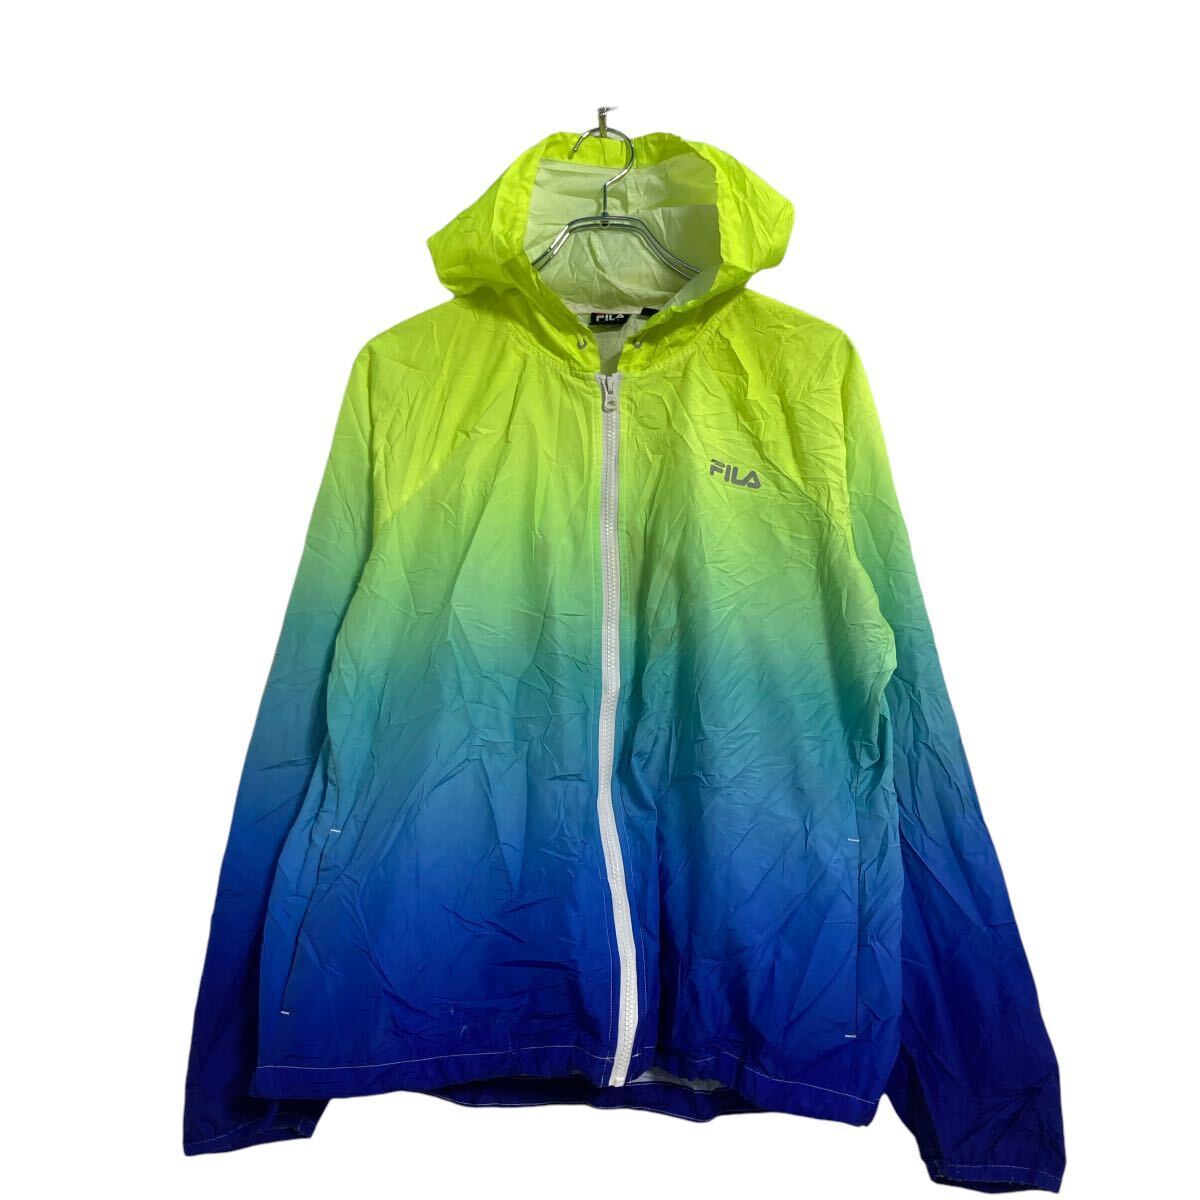 FILA nylon jacket L neon yellow green navy gradation filler Zip up old clothes . America buying up a604-6855